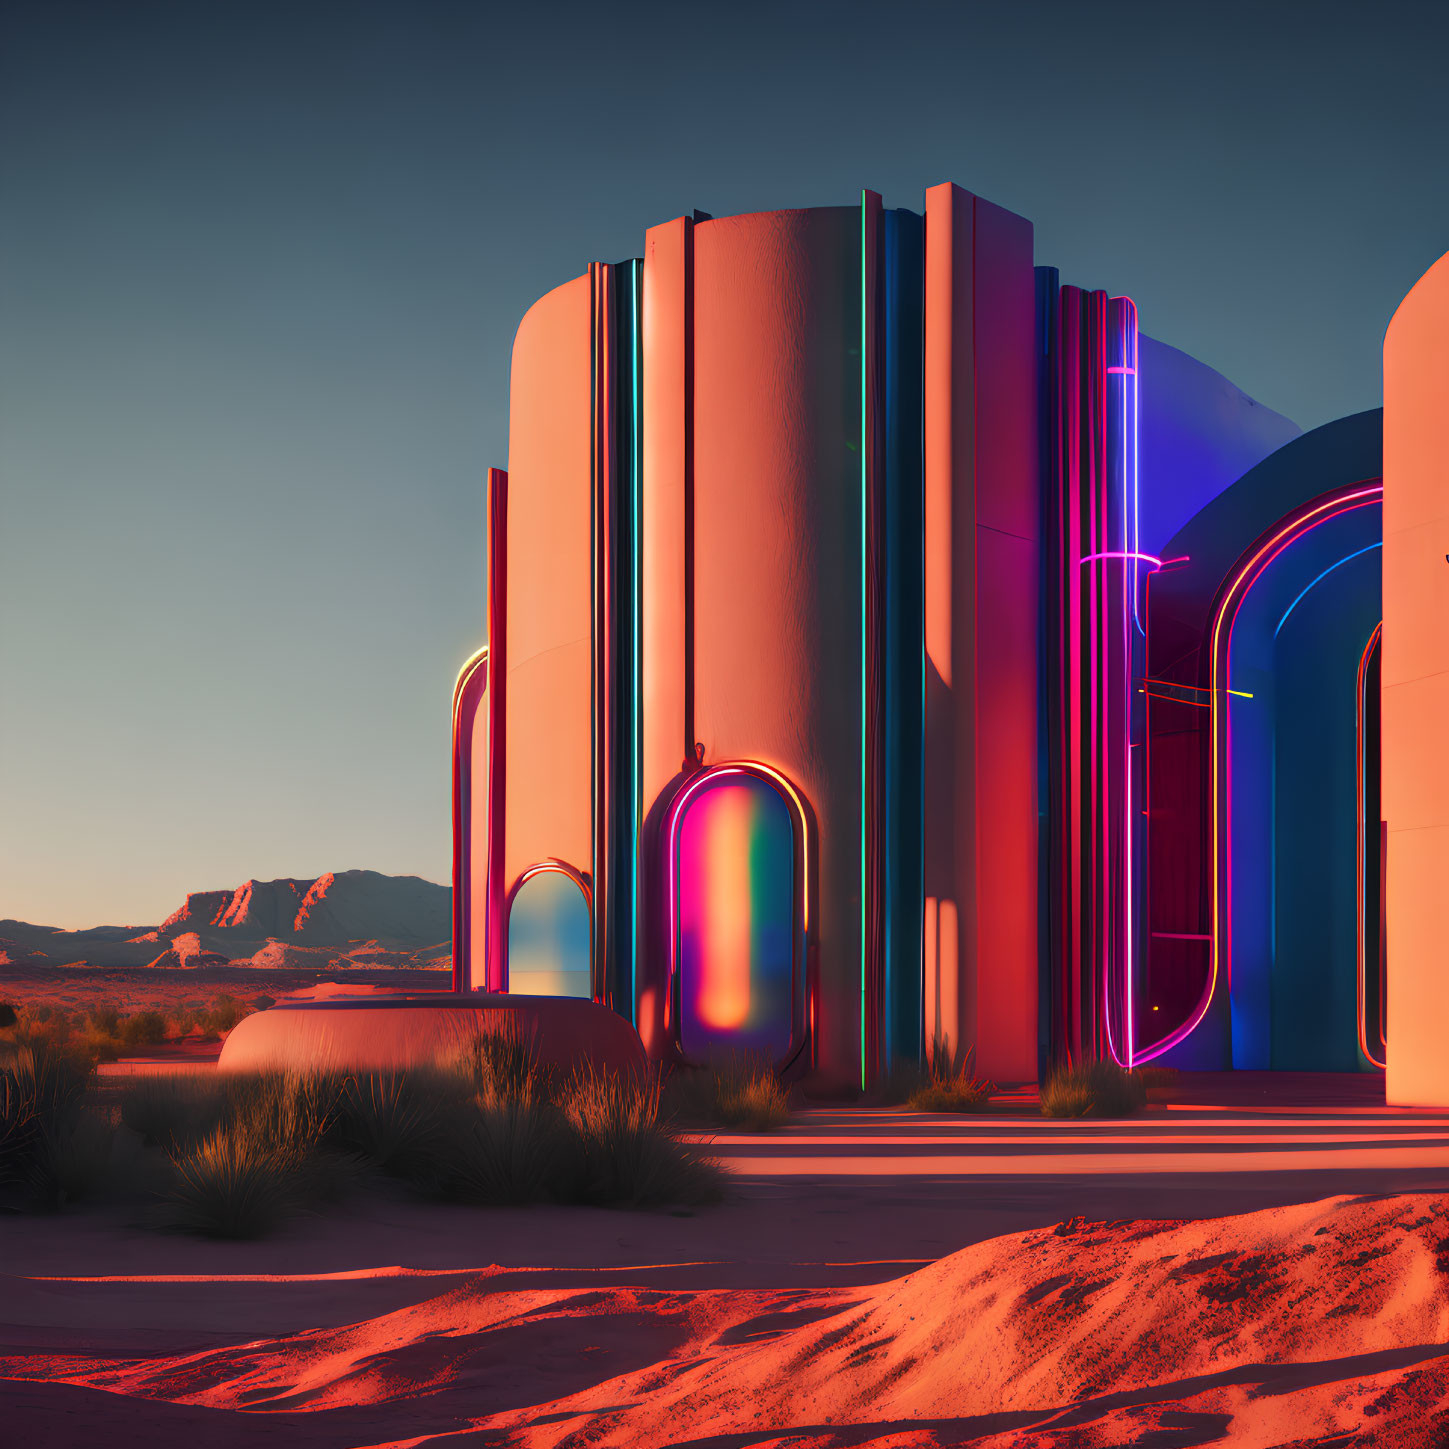 Futuristic Building with Neon Outlines in Desert Sunset